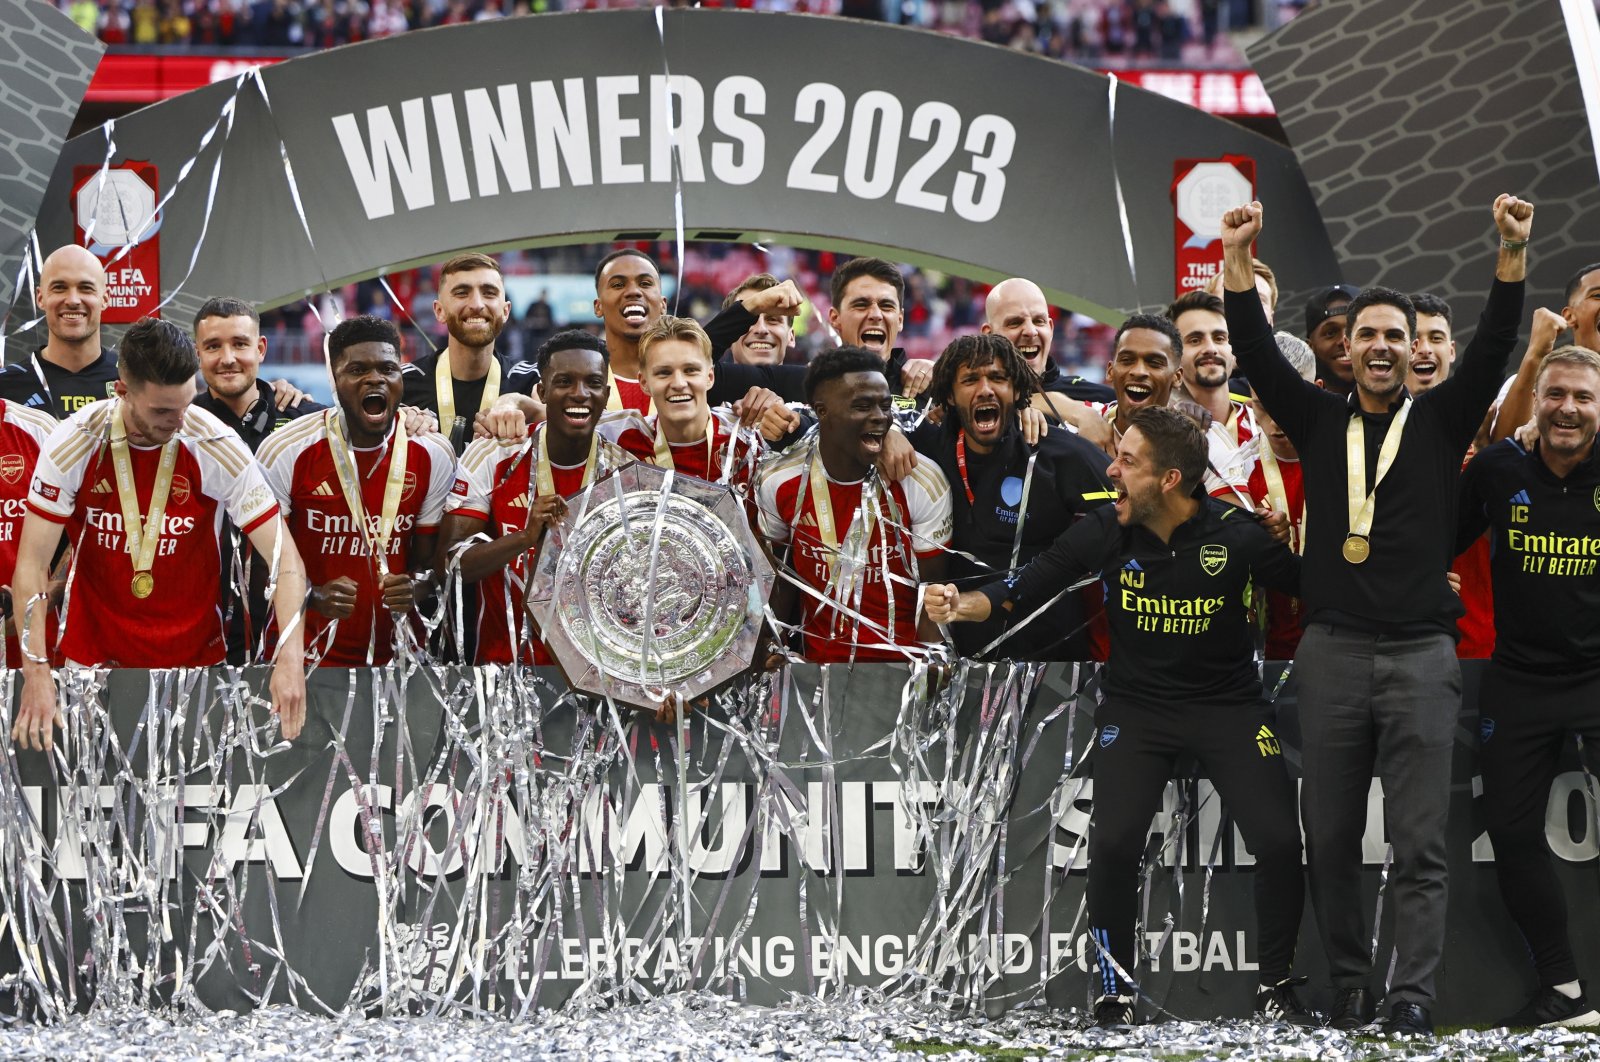 Arsenal players celebrate with the trophy after winning the FA Community Shield match against Manchester City, London, Britain, Aug. 6, 2023. (EPA Photo)